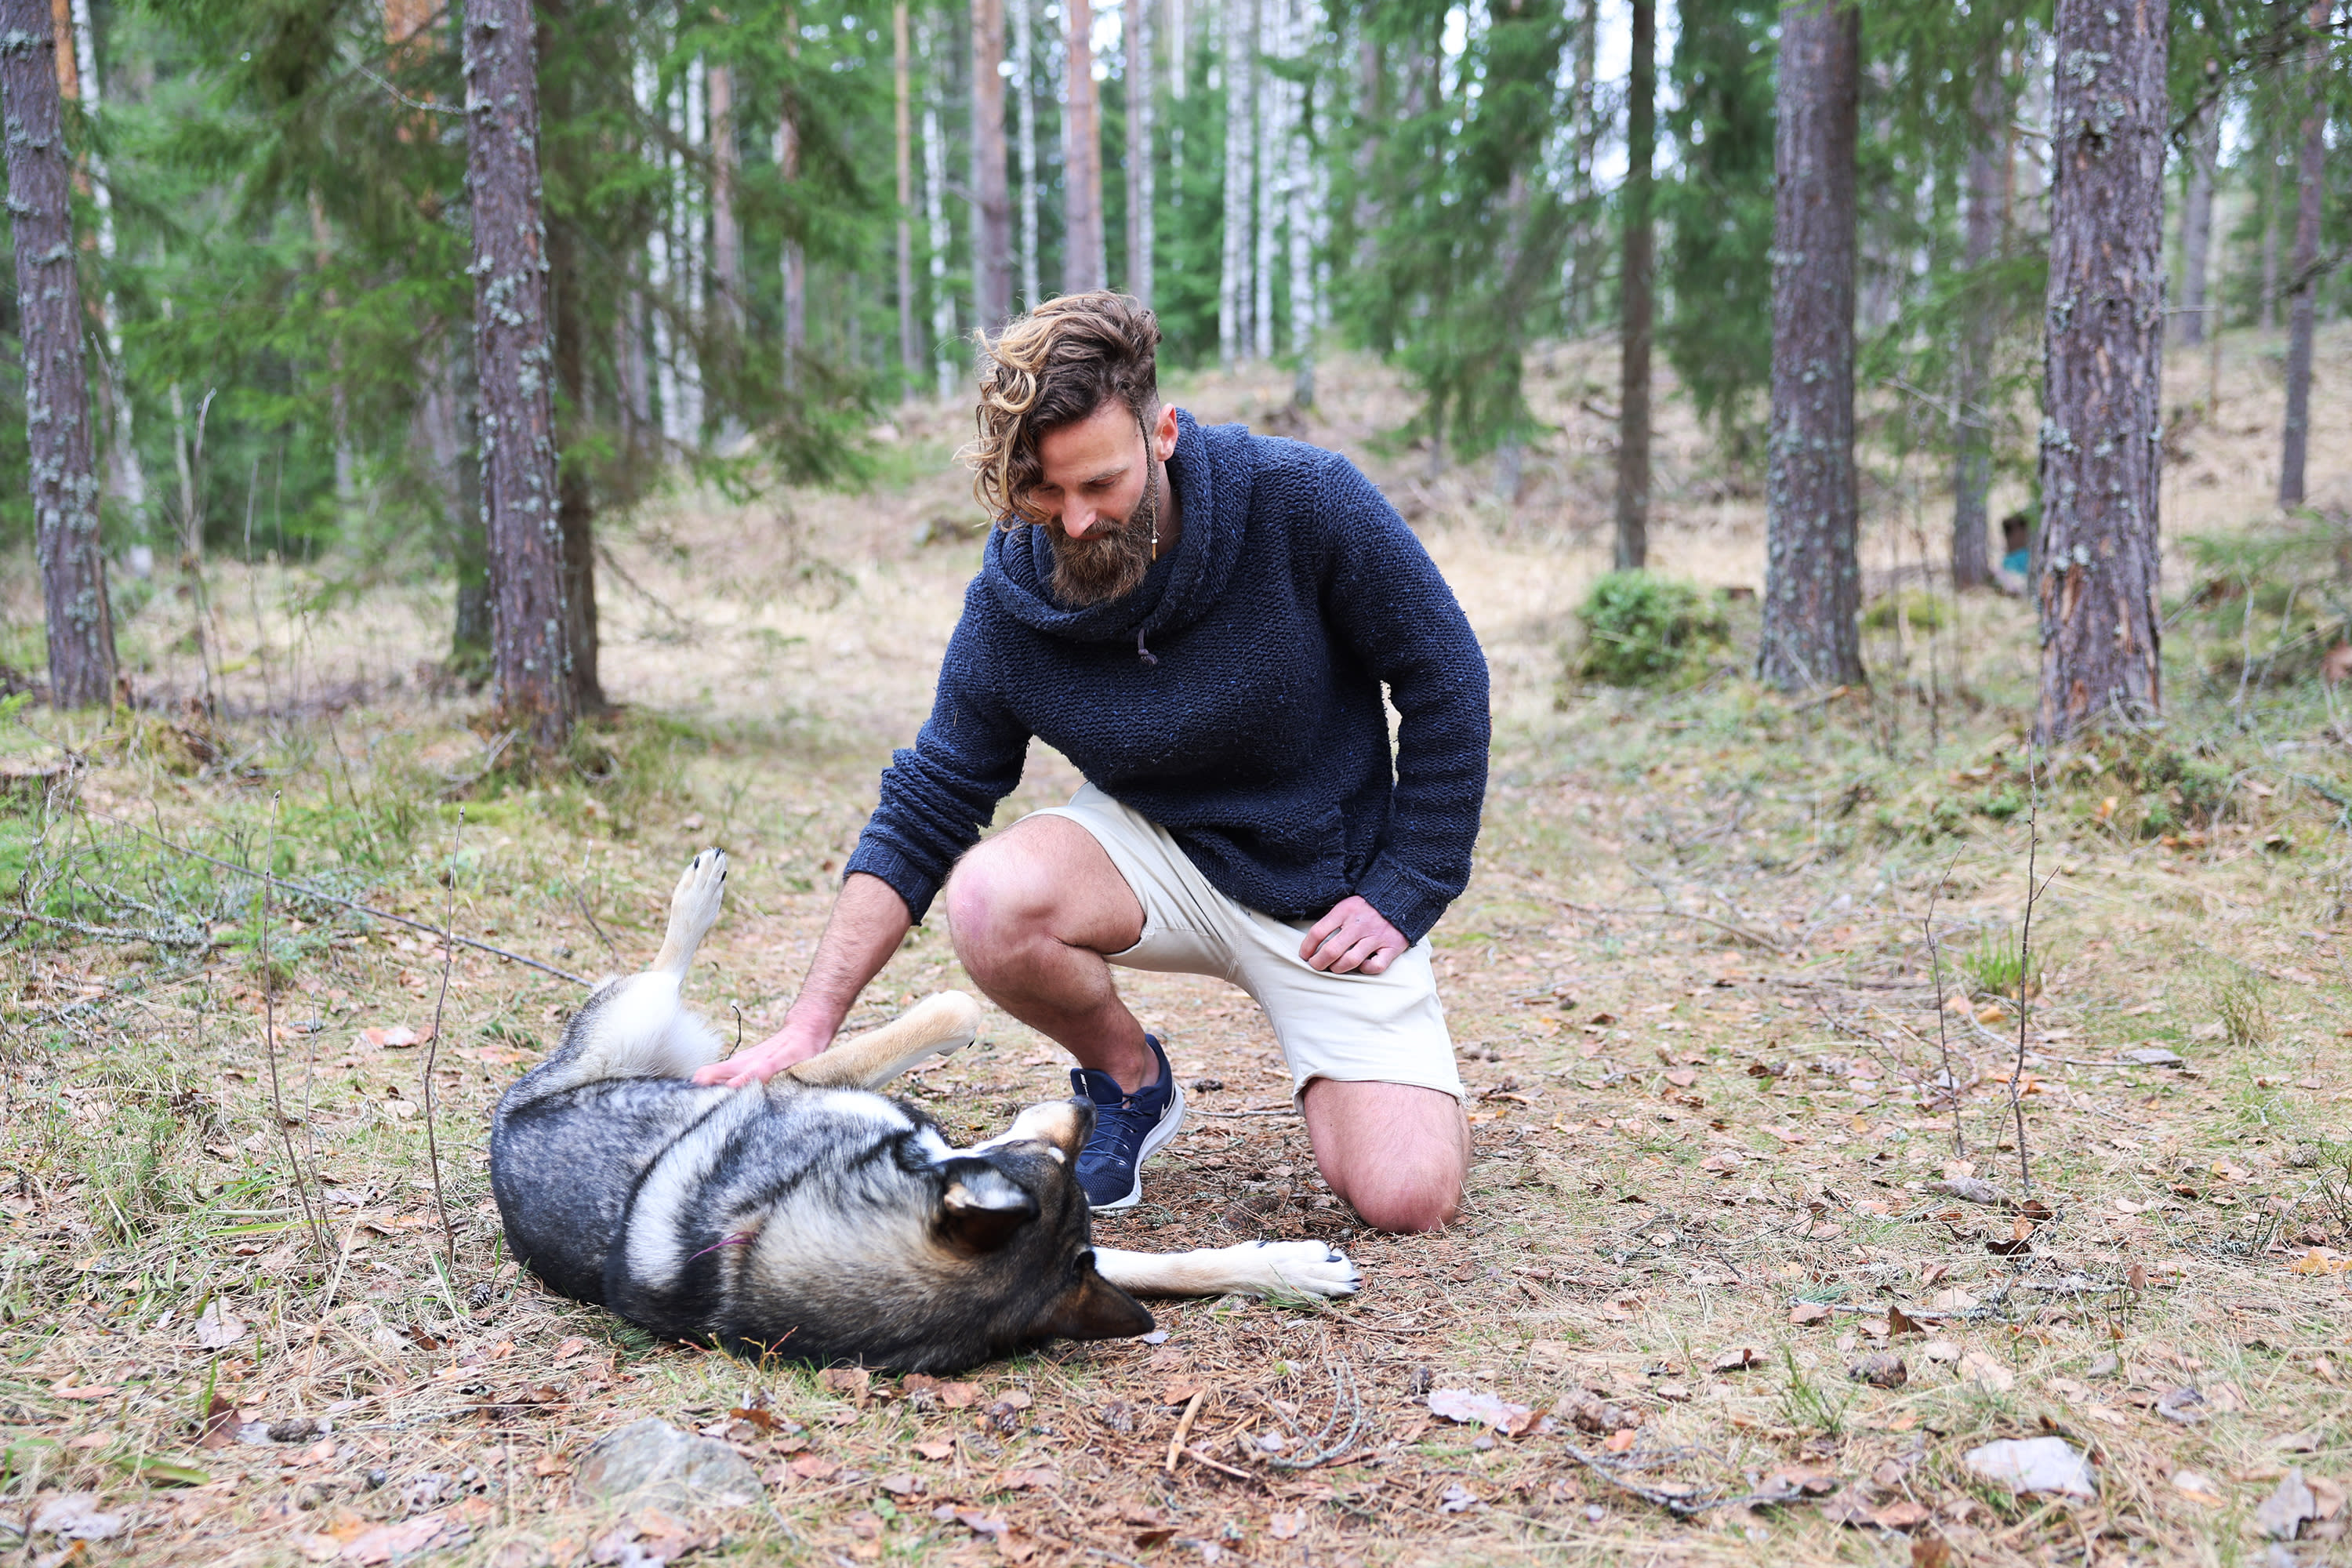 Finland "i hated" the dog owner is blamed for animal welfare